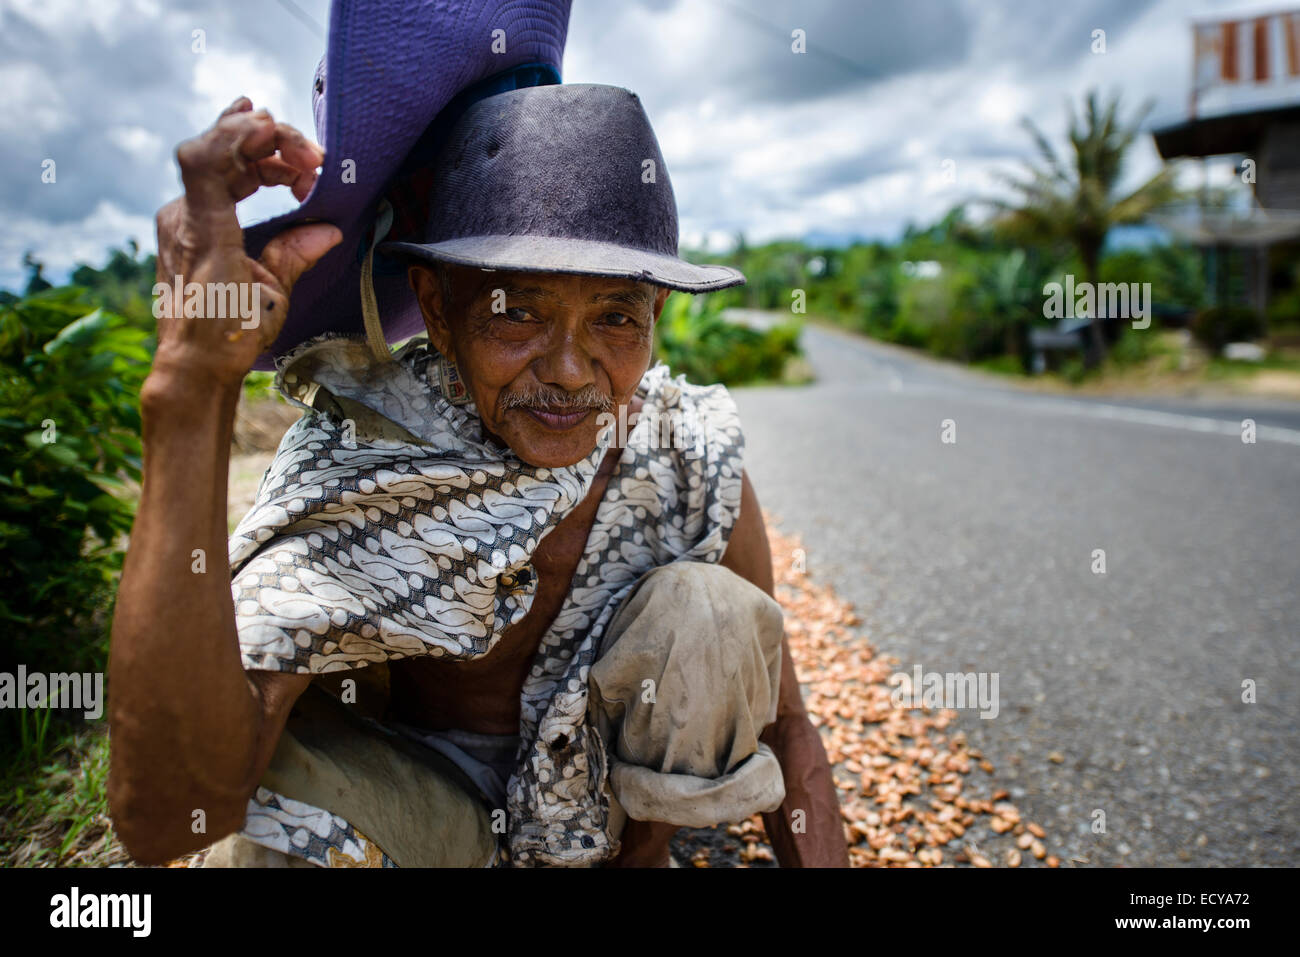 Cocoa beans collector, Sulawesi, Indonesia Stock Photo